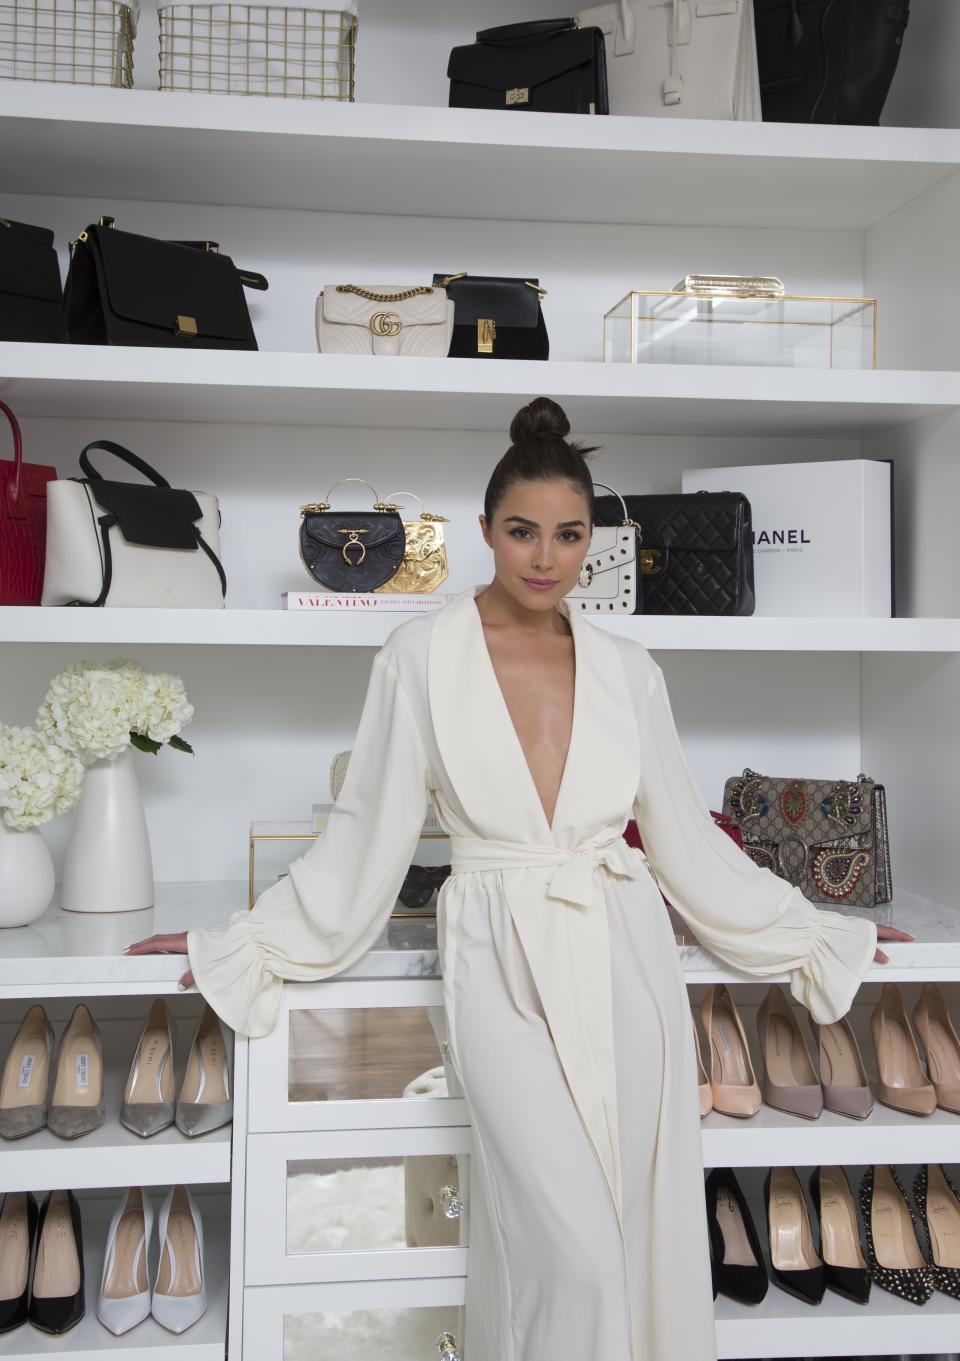 The model and actress needed a total closet re-haul to go with her new home renovation and thanks to social media, Culpo knew just who to turn to